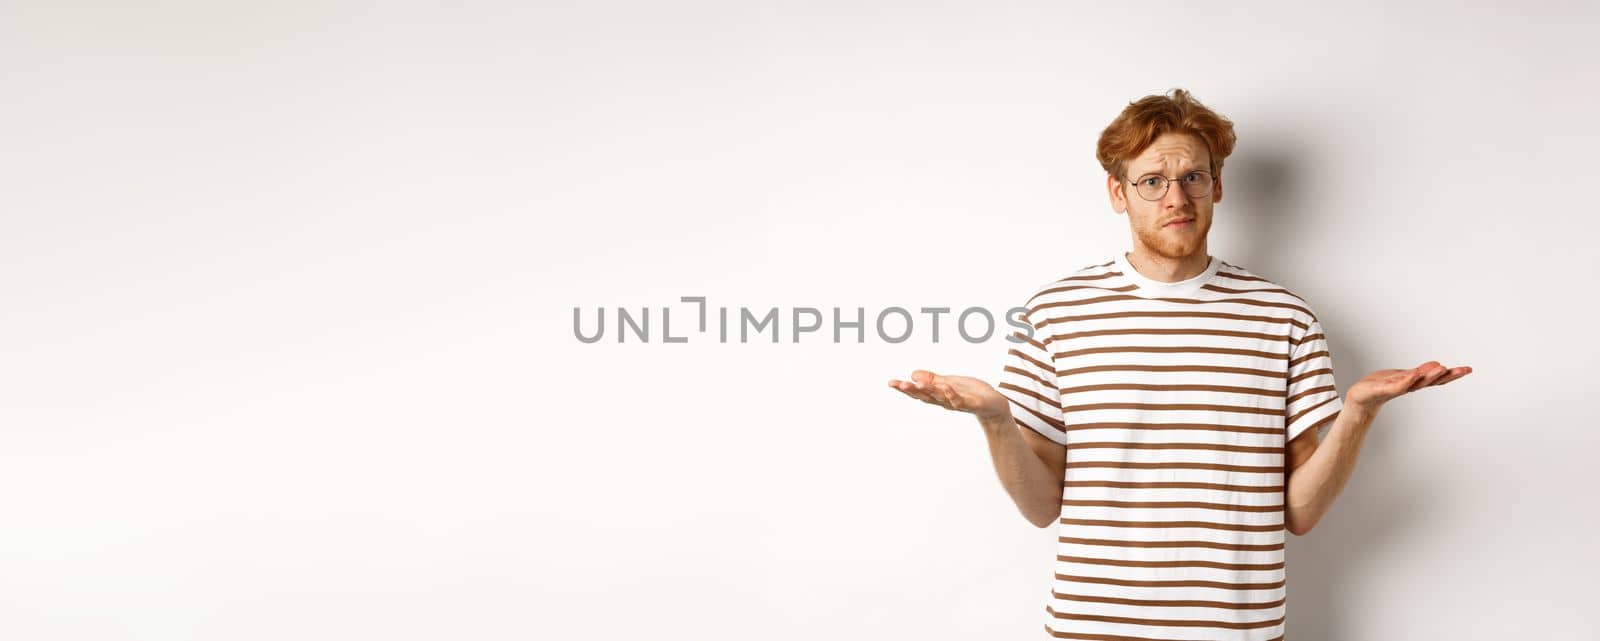 Confused boyfriend with red hair shrugging, spread hands sideways and staring at camera puzzled, asking what, stnading over white background.